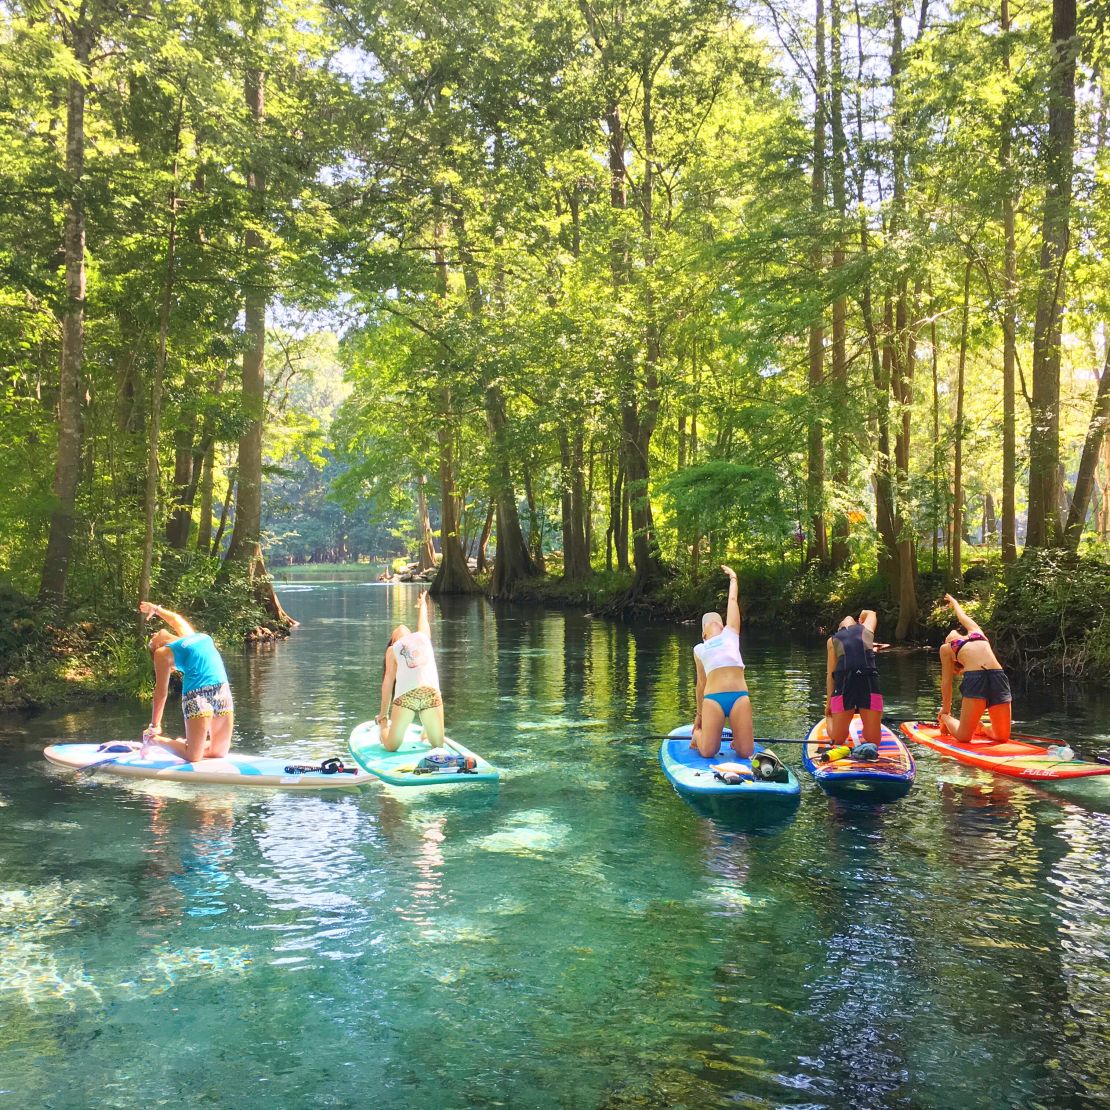 Paddleboard yoga provides a serene alternative to water parks.